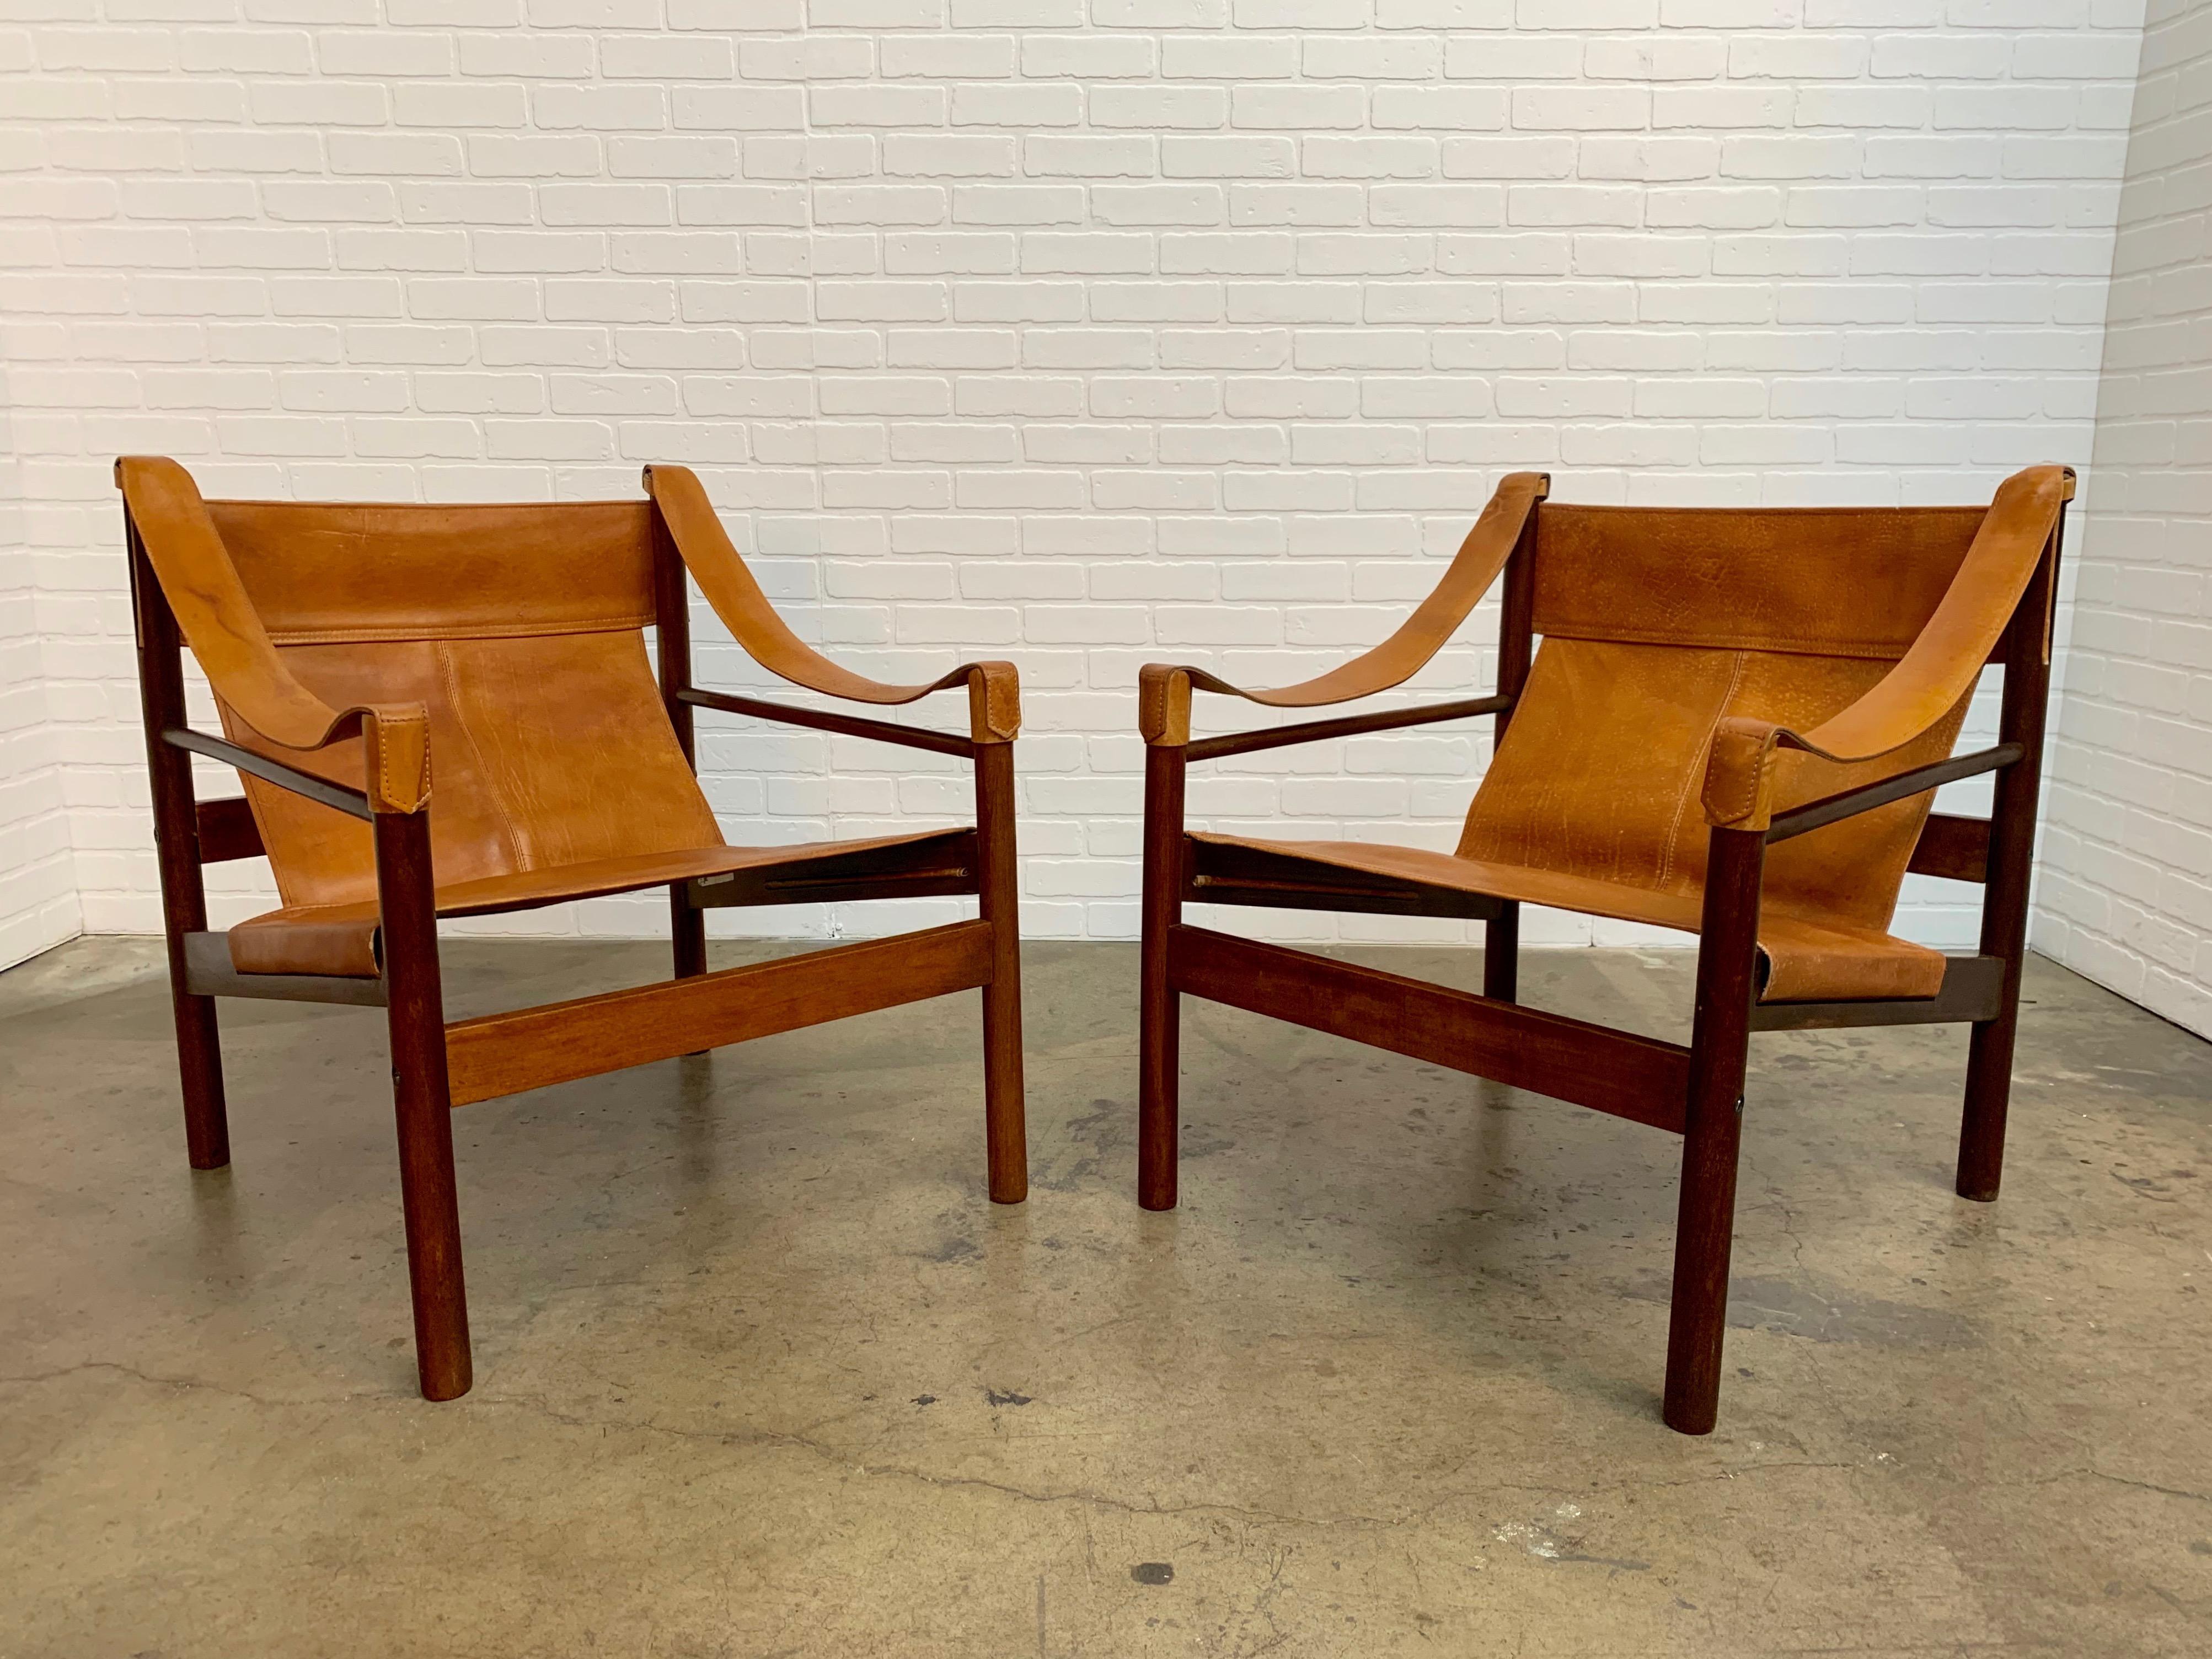 Pair of solid Mahogany with caramel tan leather lounge chairs 1960s made in Argentina by Abel Gonzalez.